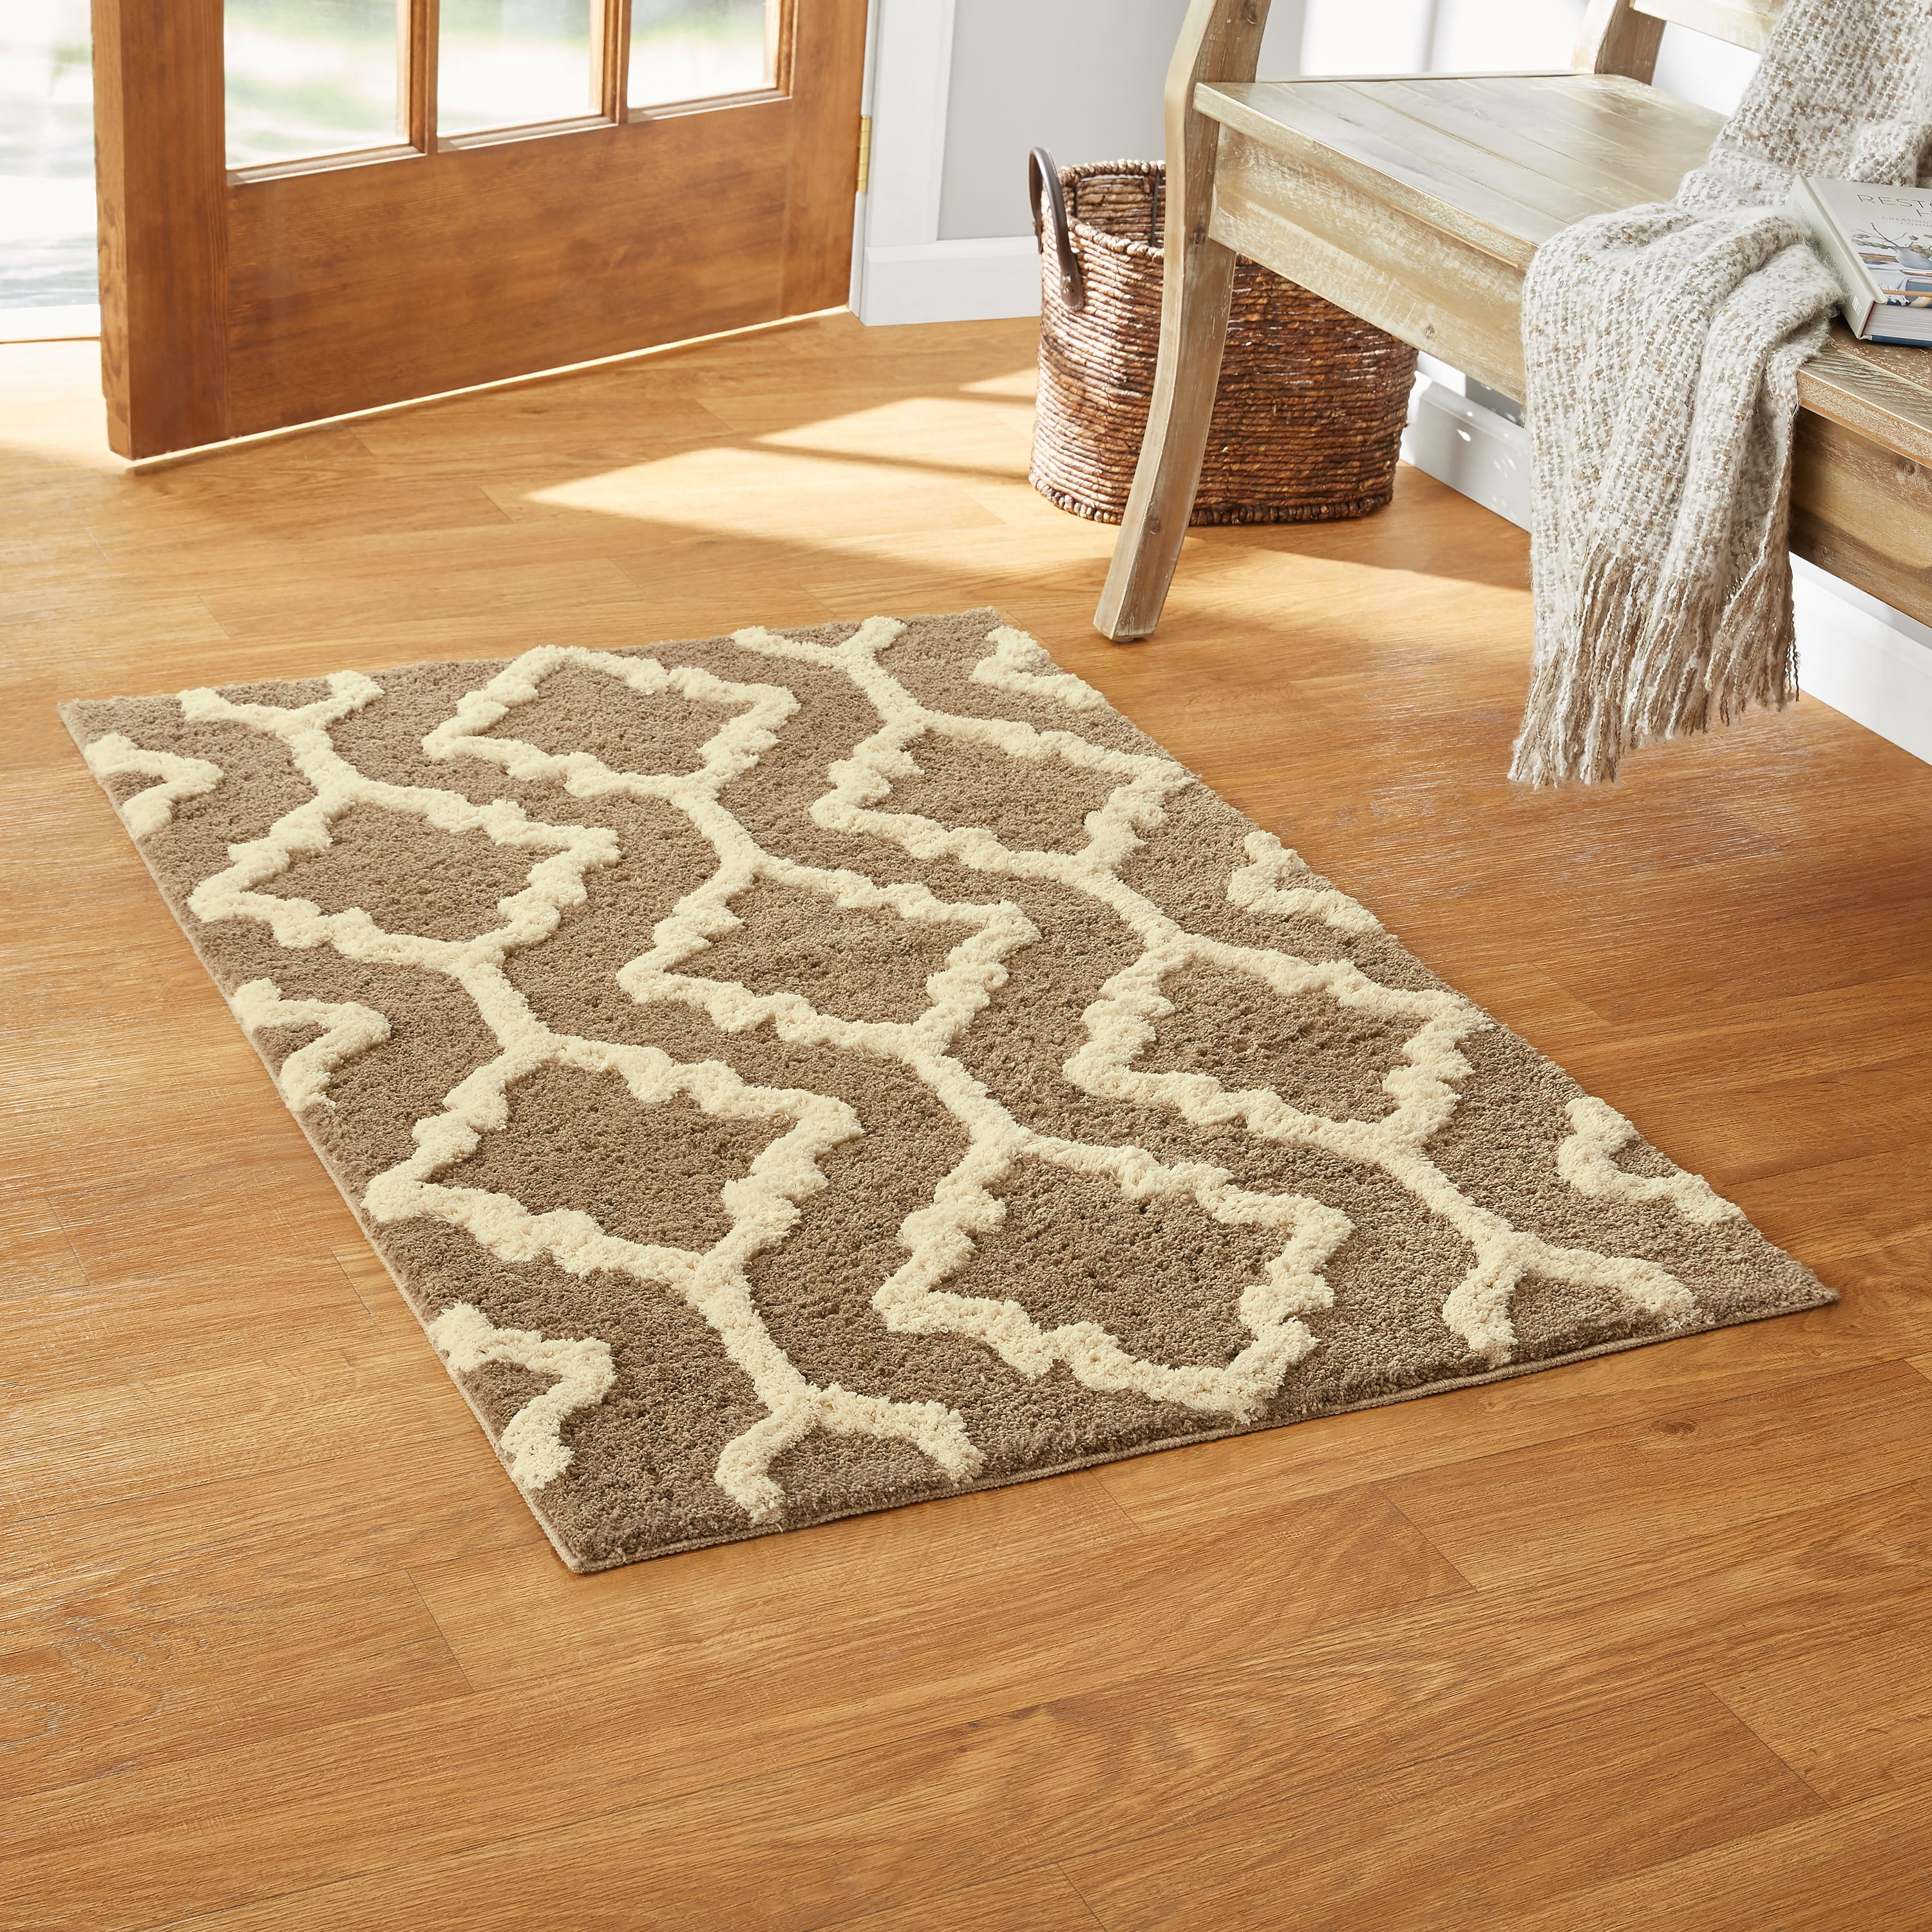 Taupe Geo Polyester Rug, Better Homes And Gardens Geo Waves Textured Print Area Rug